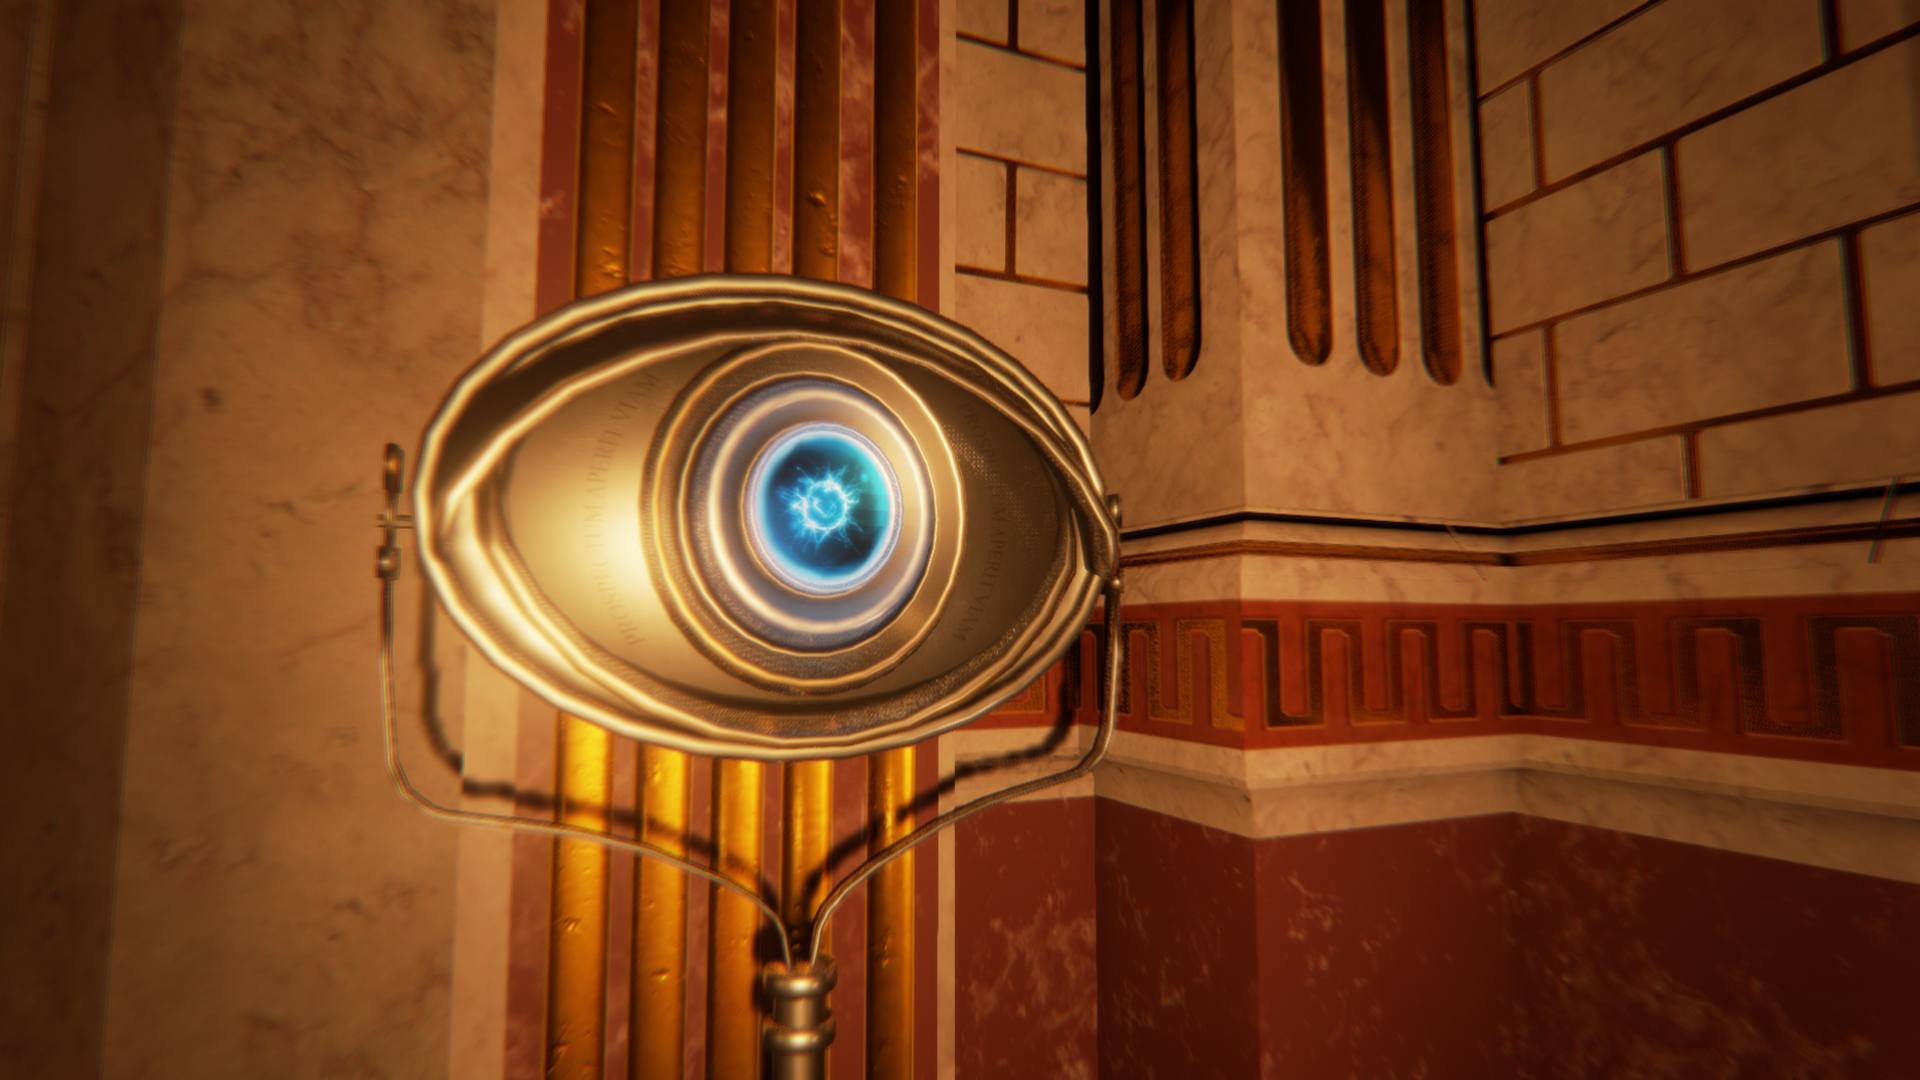 Pneuma: Breath of Life is available on Xbox One and PC